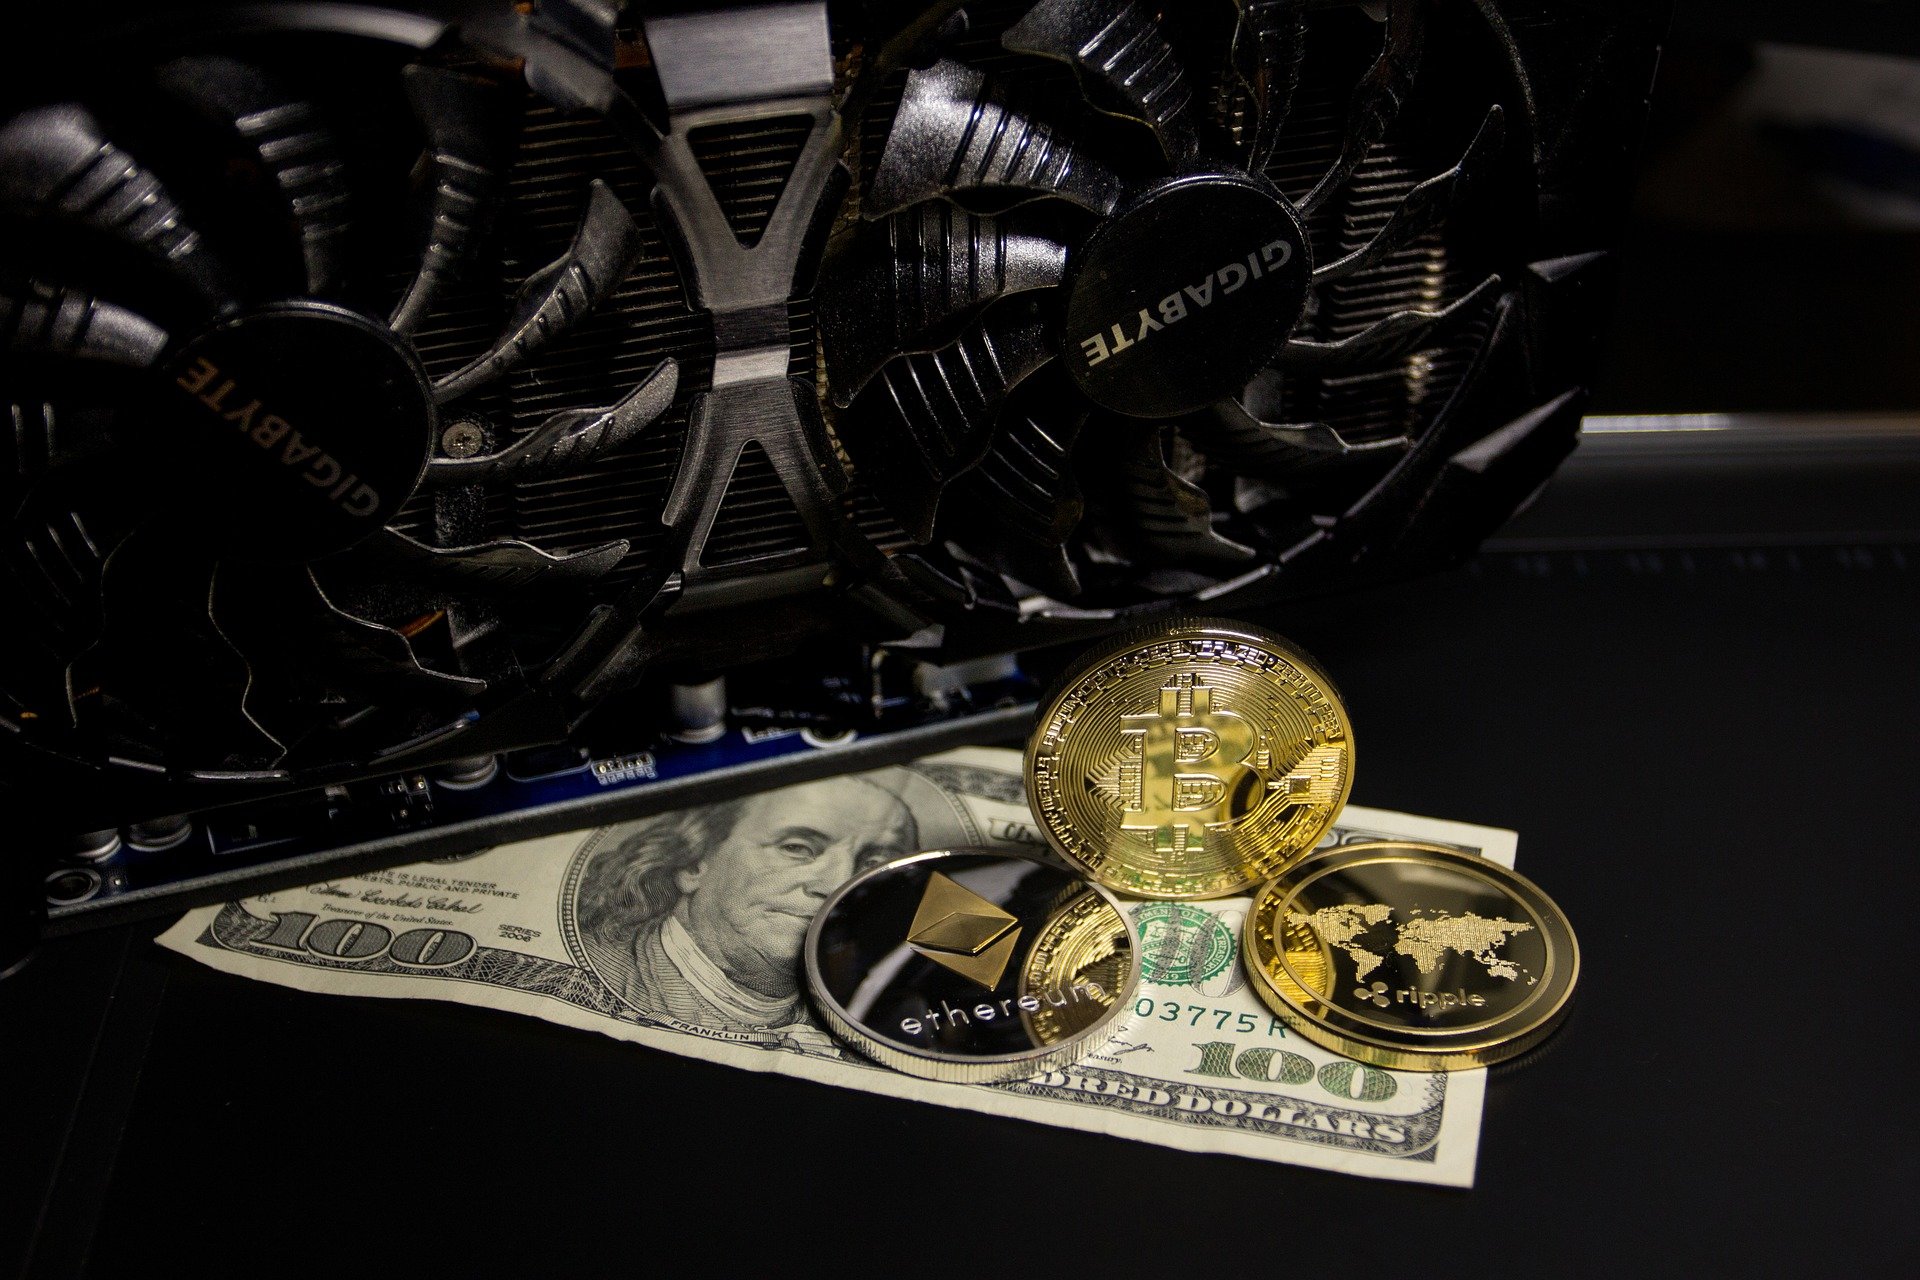 Cryptocurrency Mining Chip Supplier Warns Investors of Impending Revenue Decline